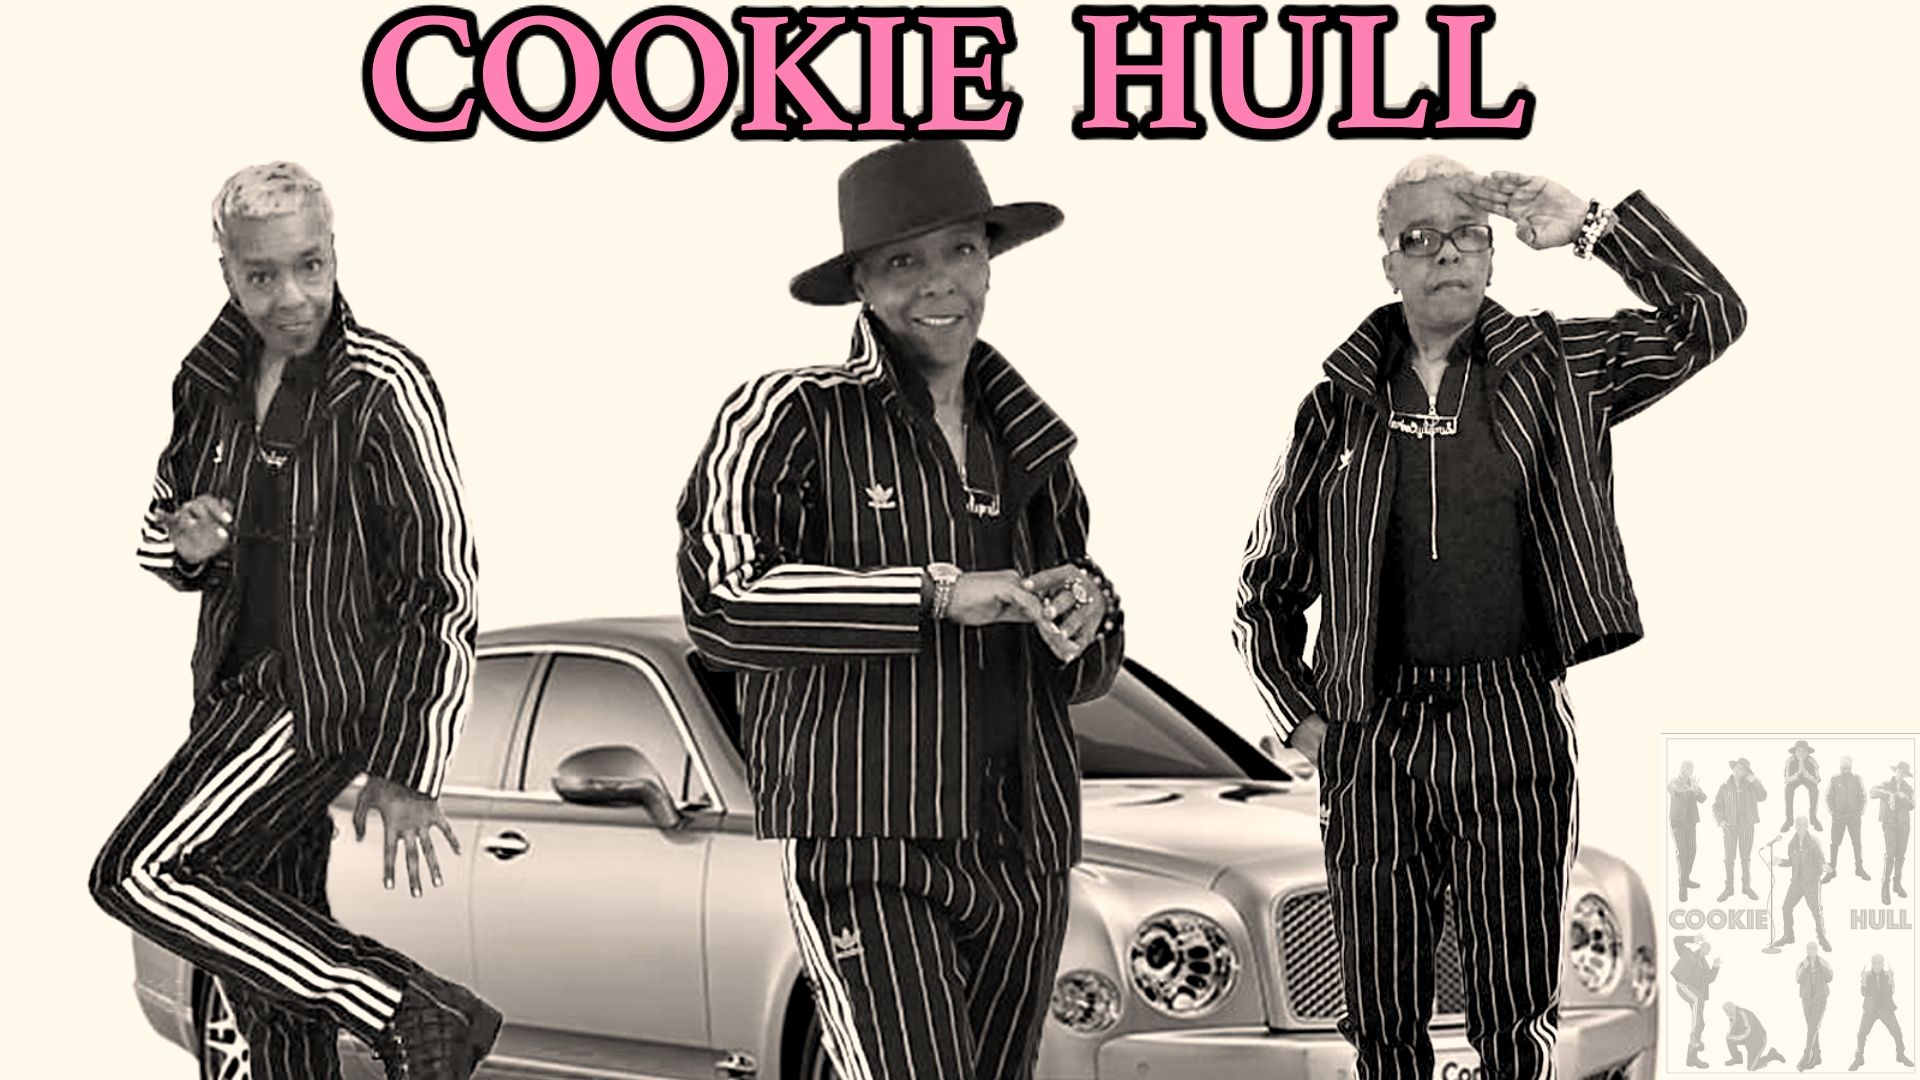 Cookie Hull "Presents" Jokes Now Consequences Later